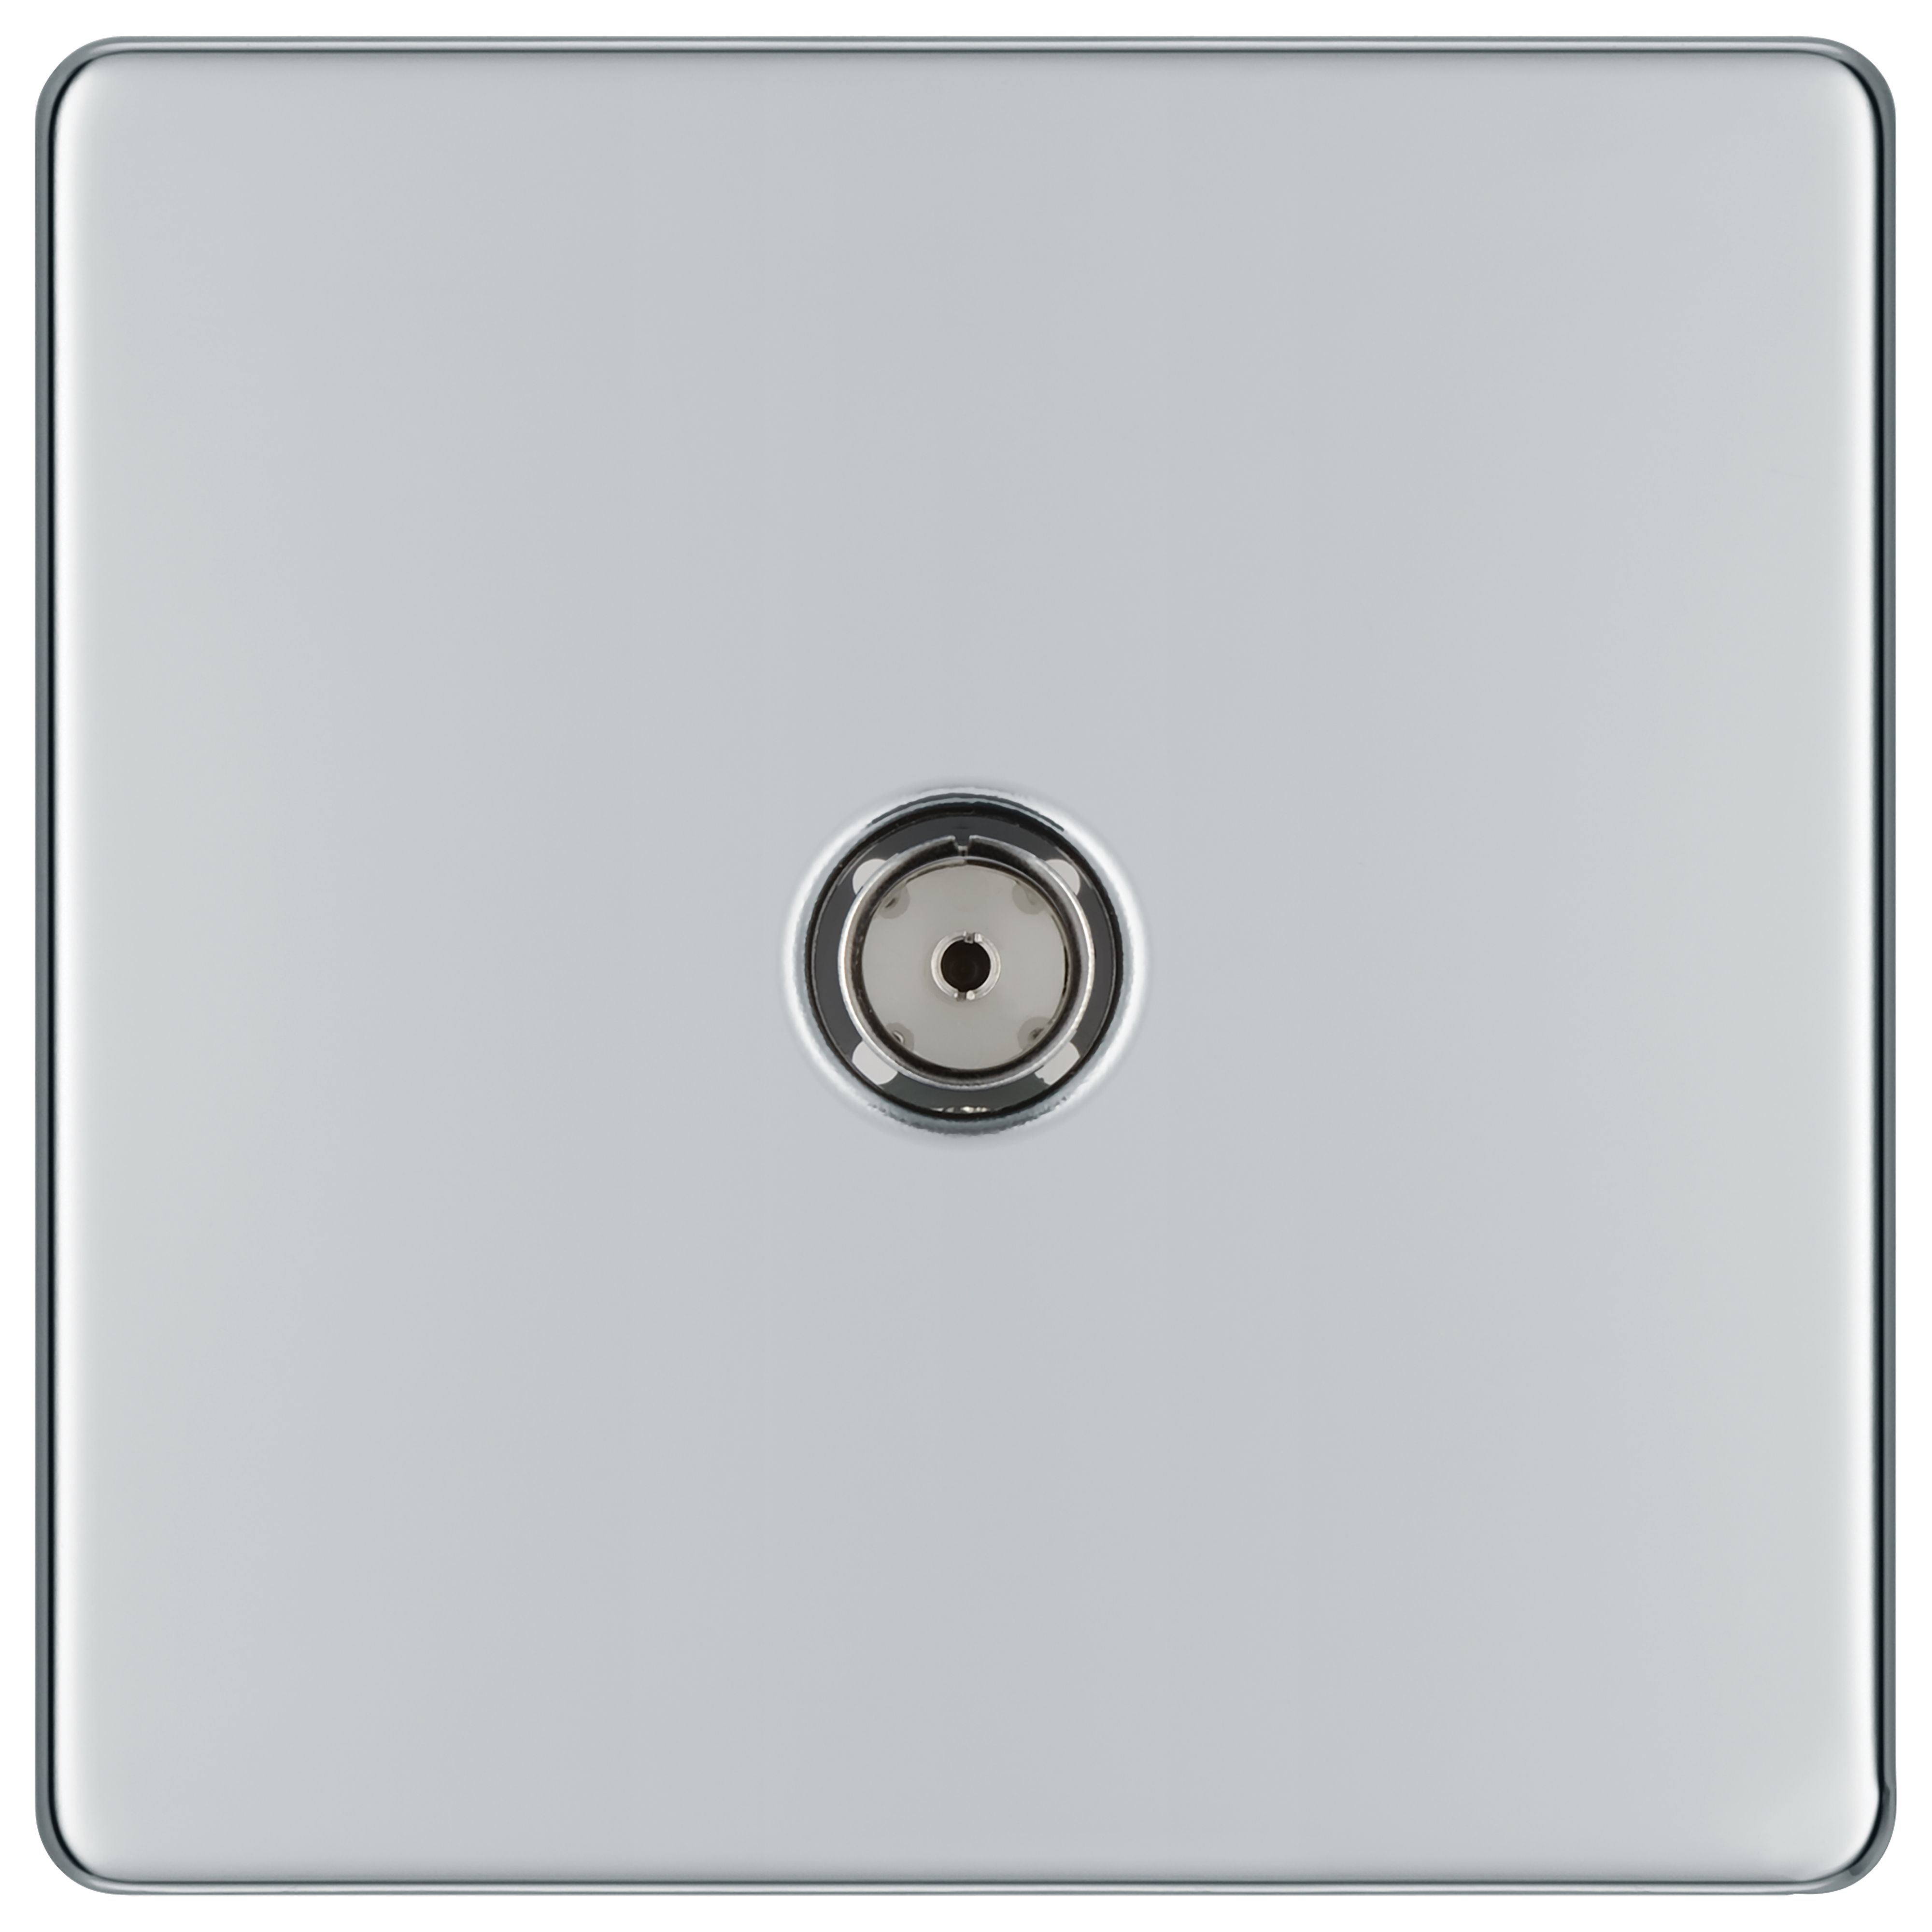 Image of BG Screwless Flat Plate Single Socket For Tv Or Fm Co-Axial Aerial Connection - Polished Chrome